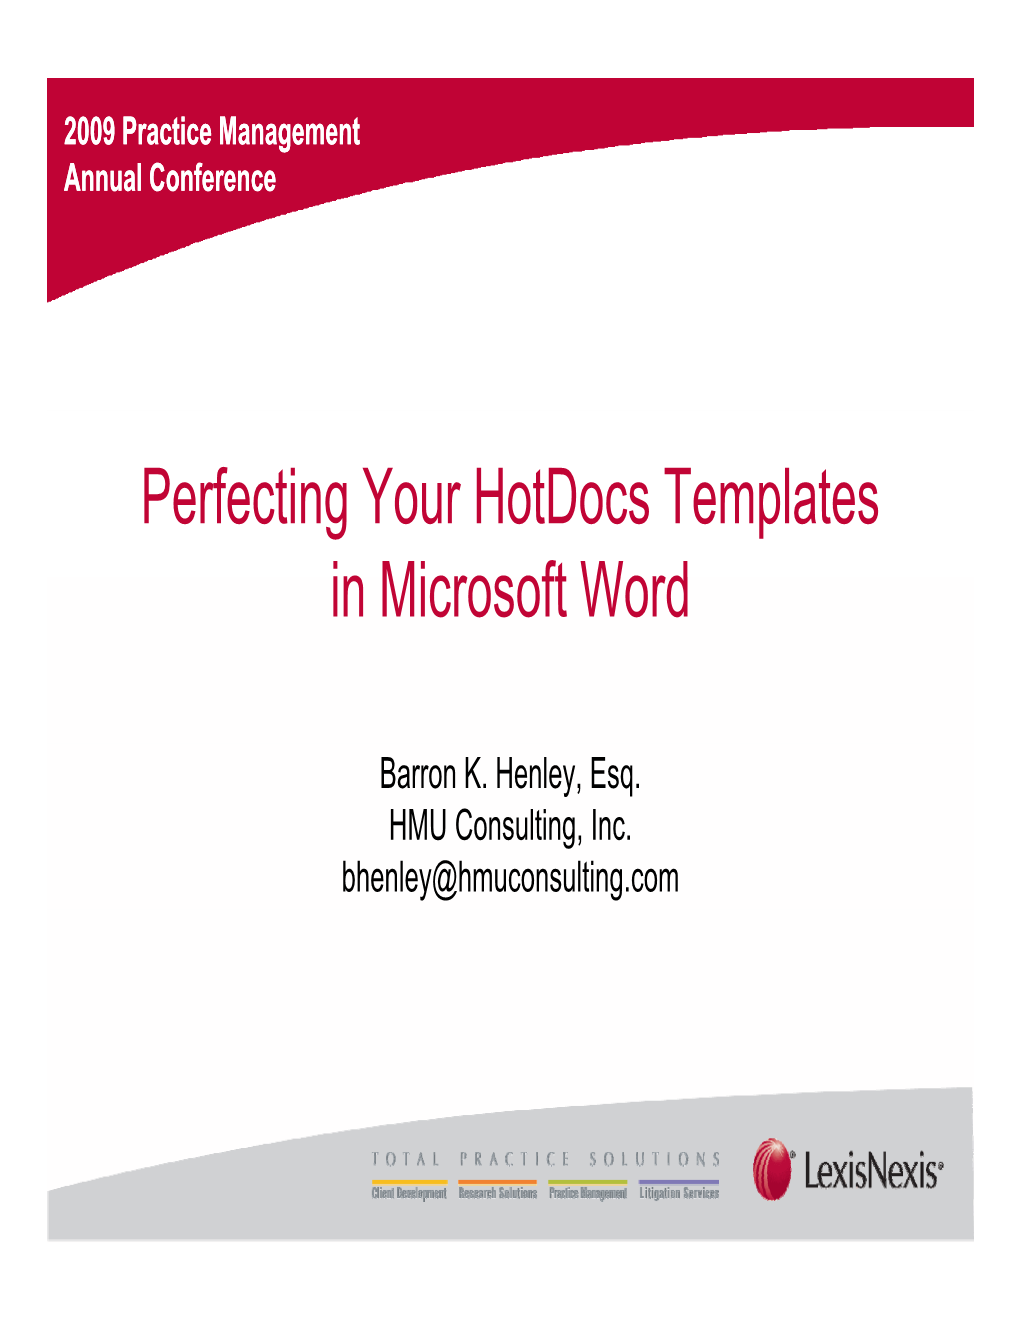 Perfecting Your Hotdocs Templates in Microsoft Word